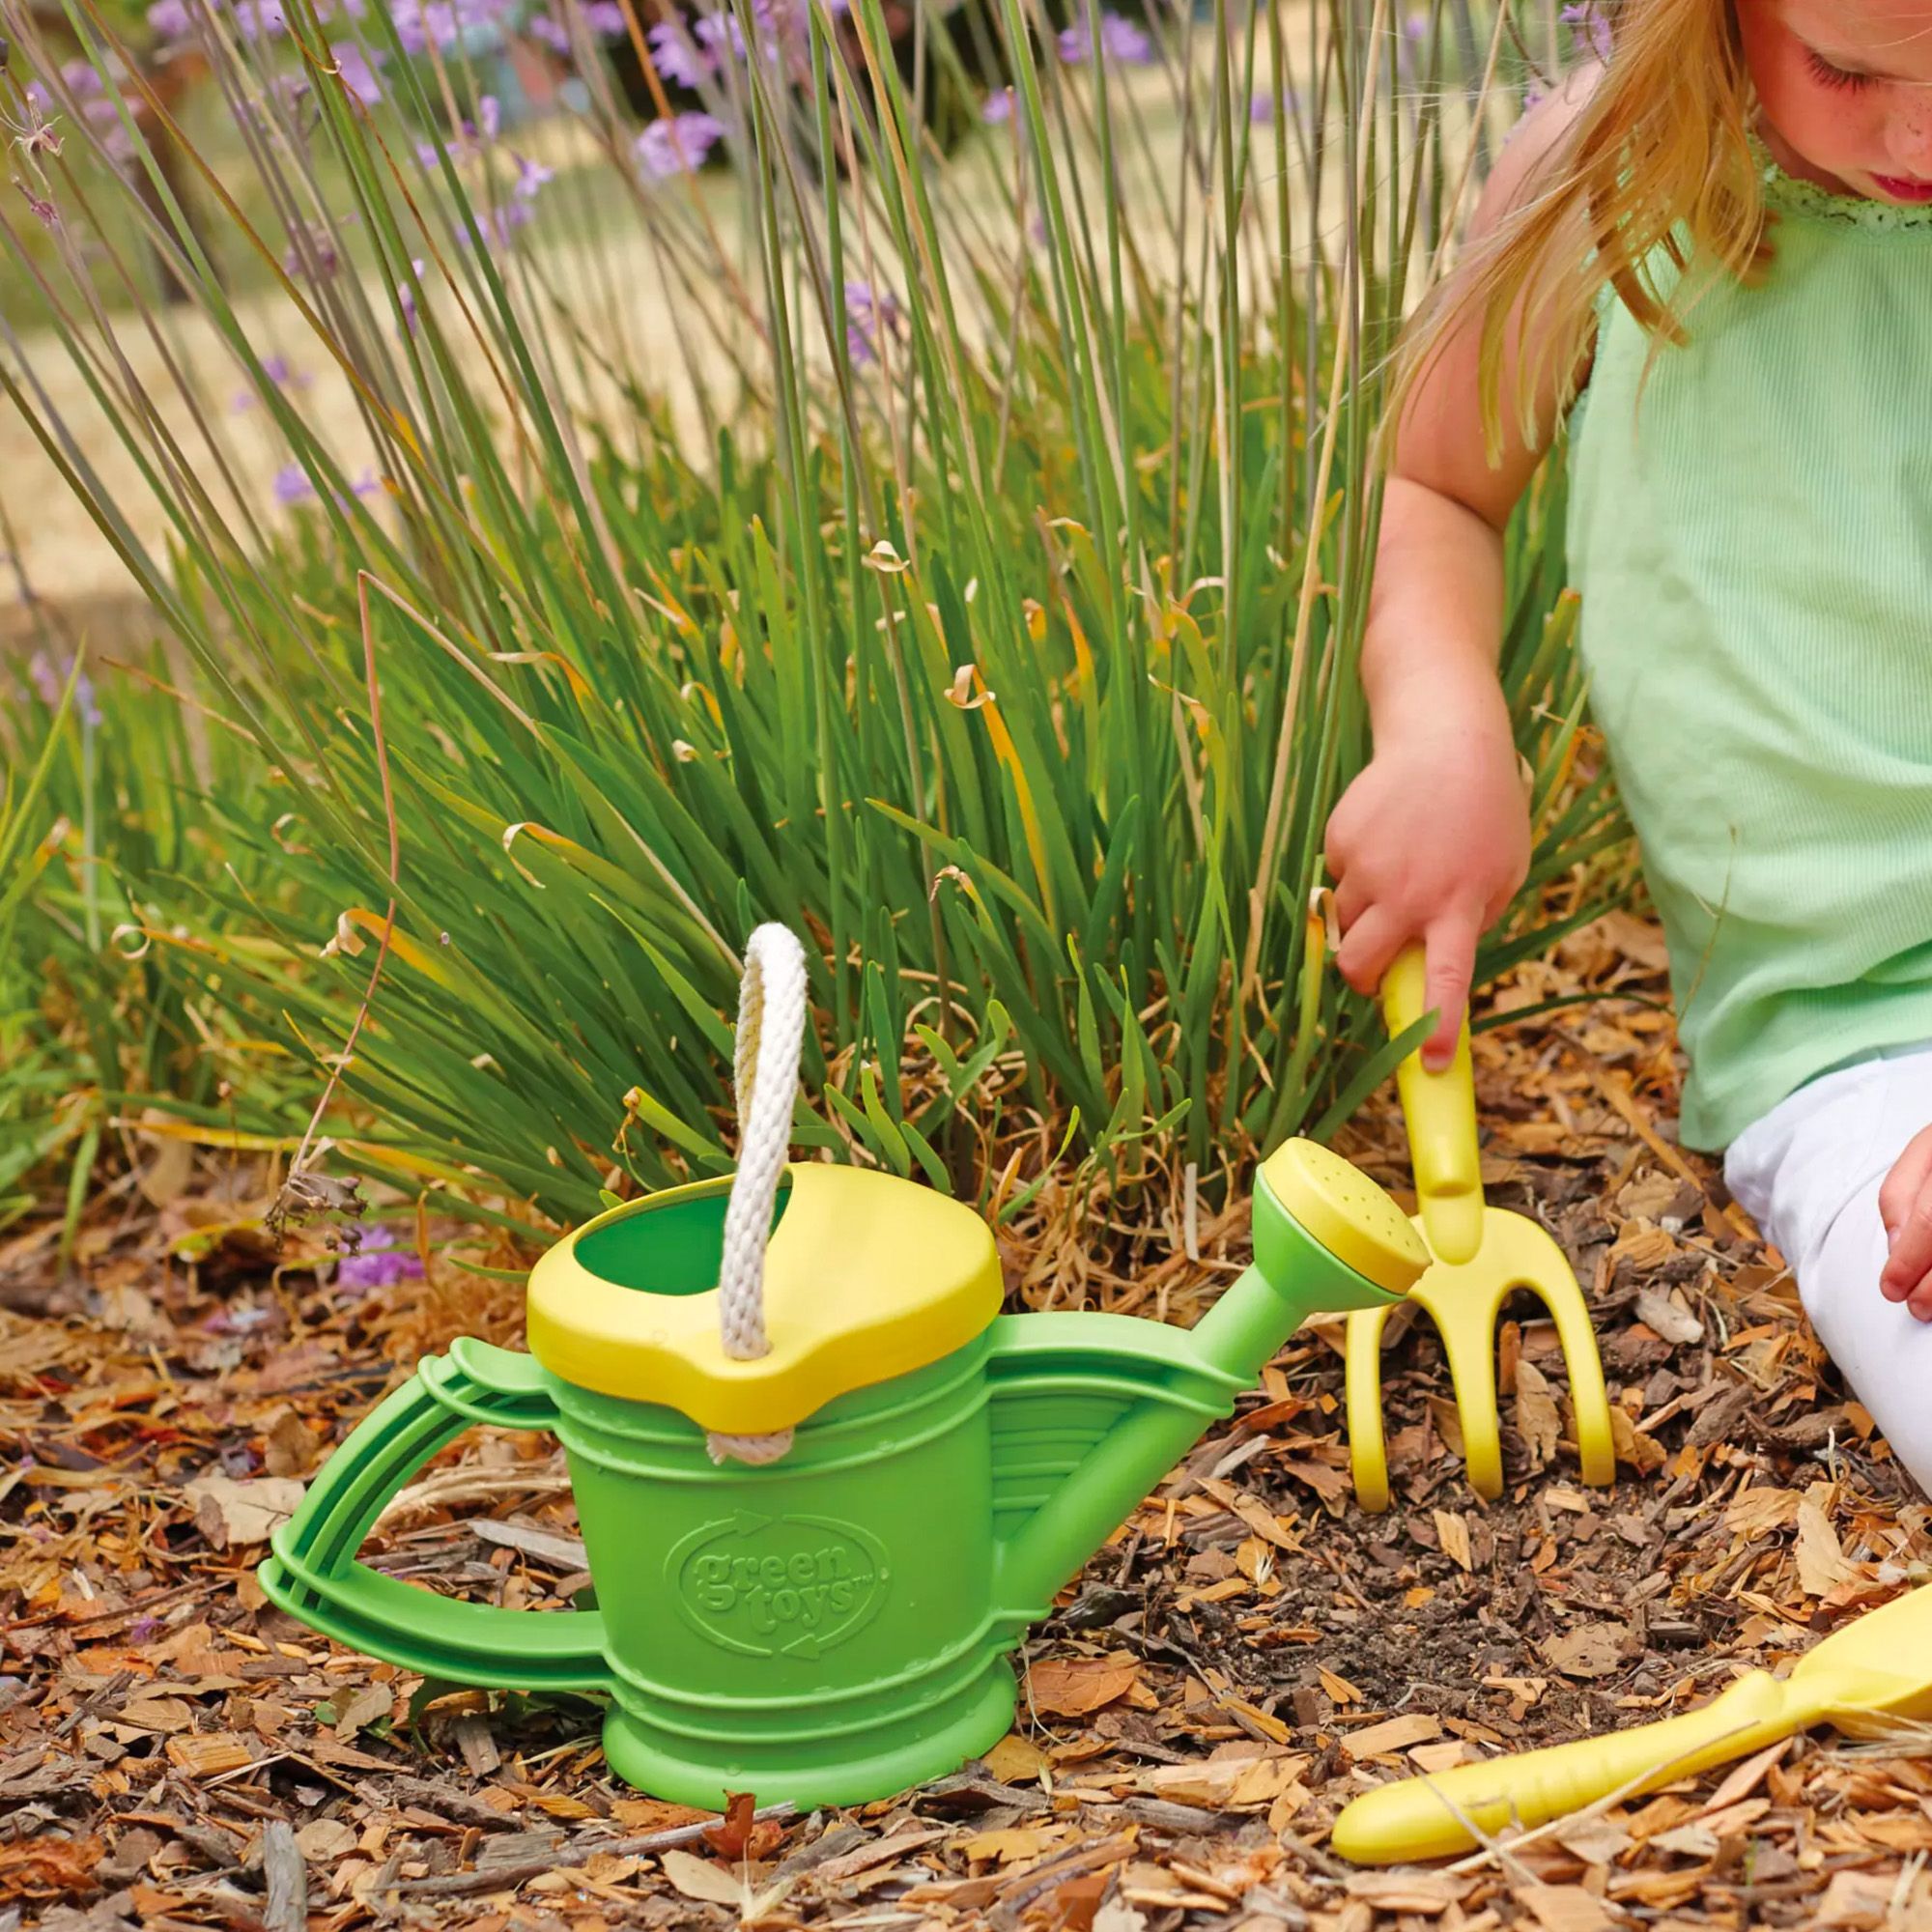 Outdoor toy gifts for kids